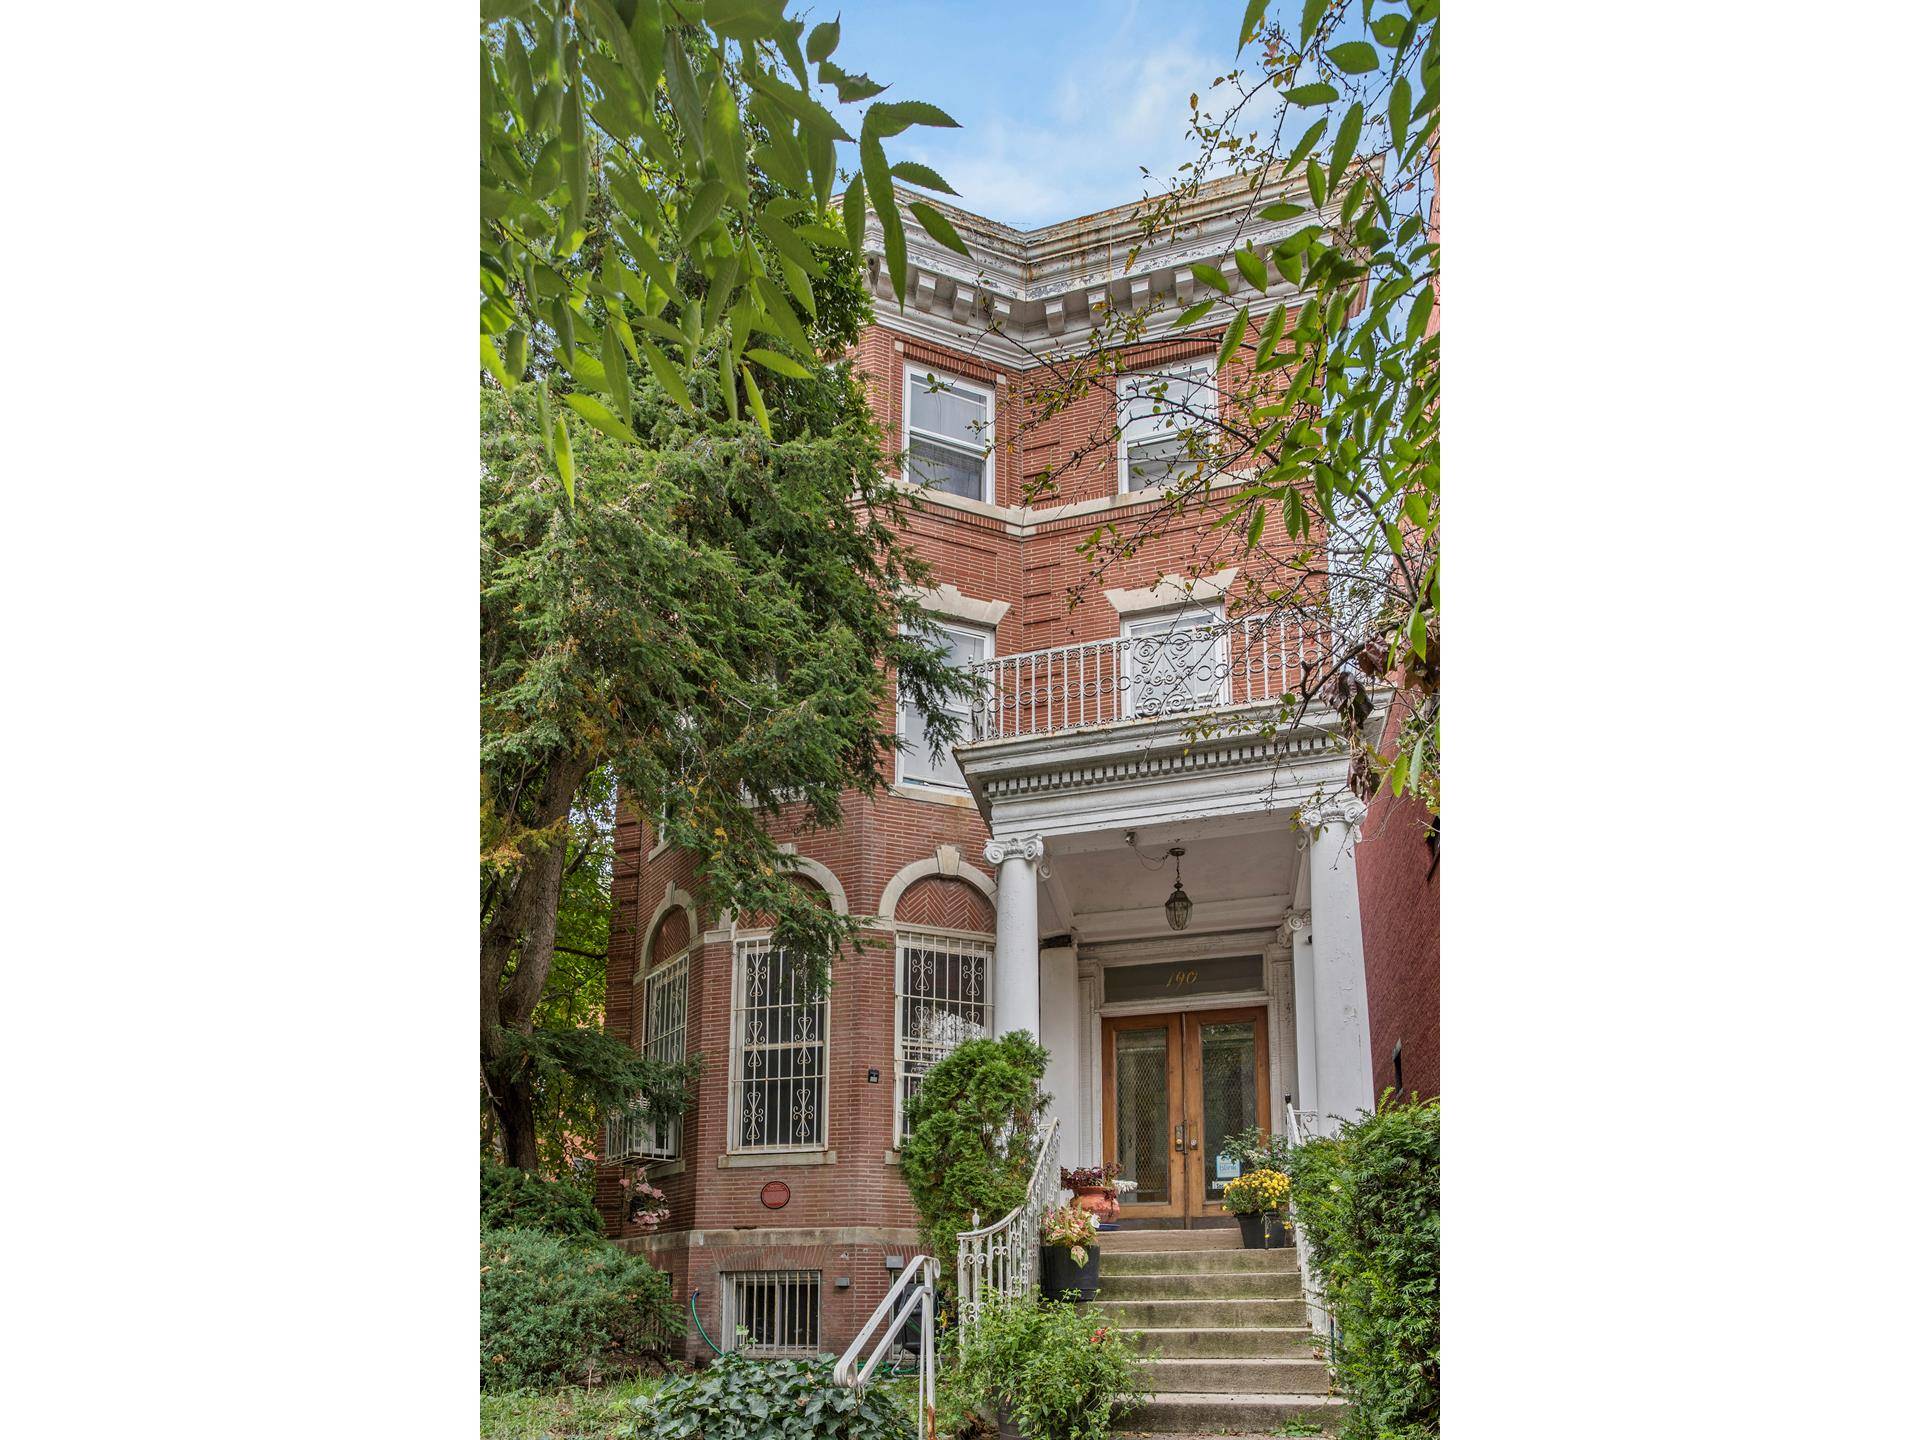 OPEN HOUSES ARE BY APPOINTMENT ONLY Built in 1910 and designed by Edward P.